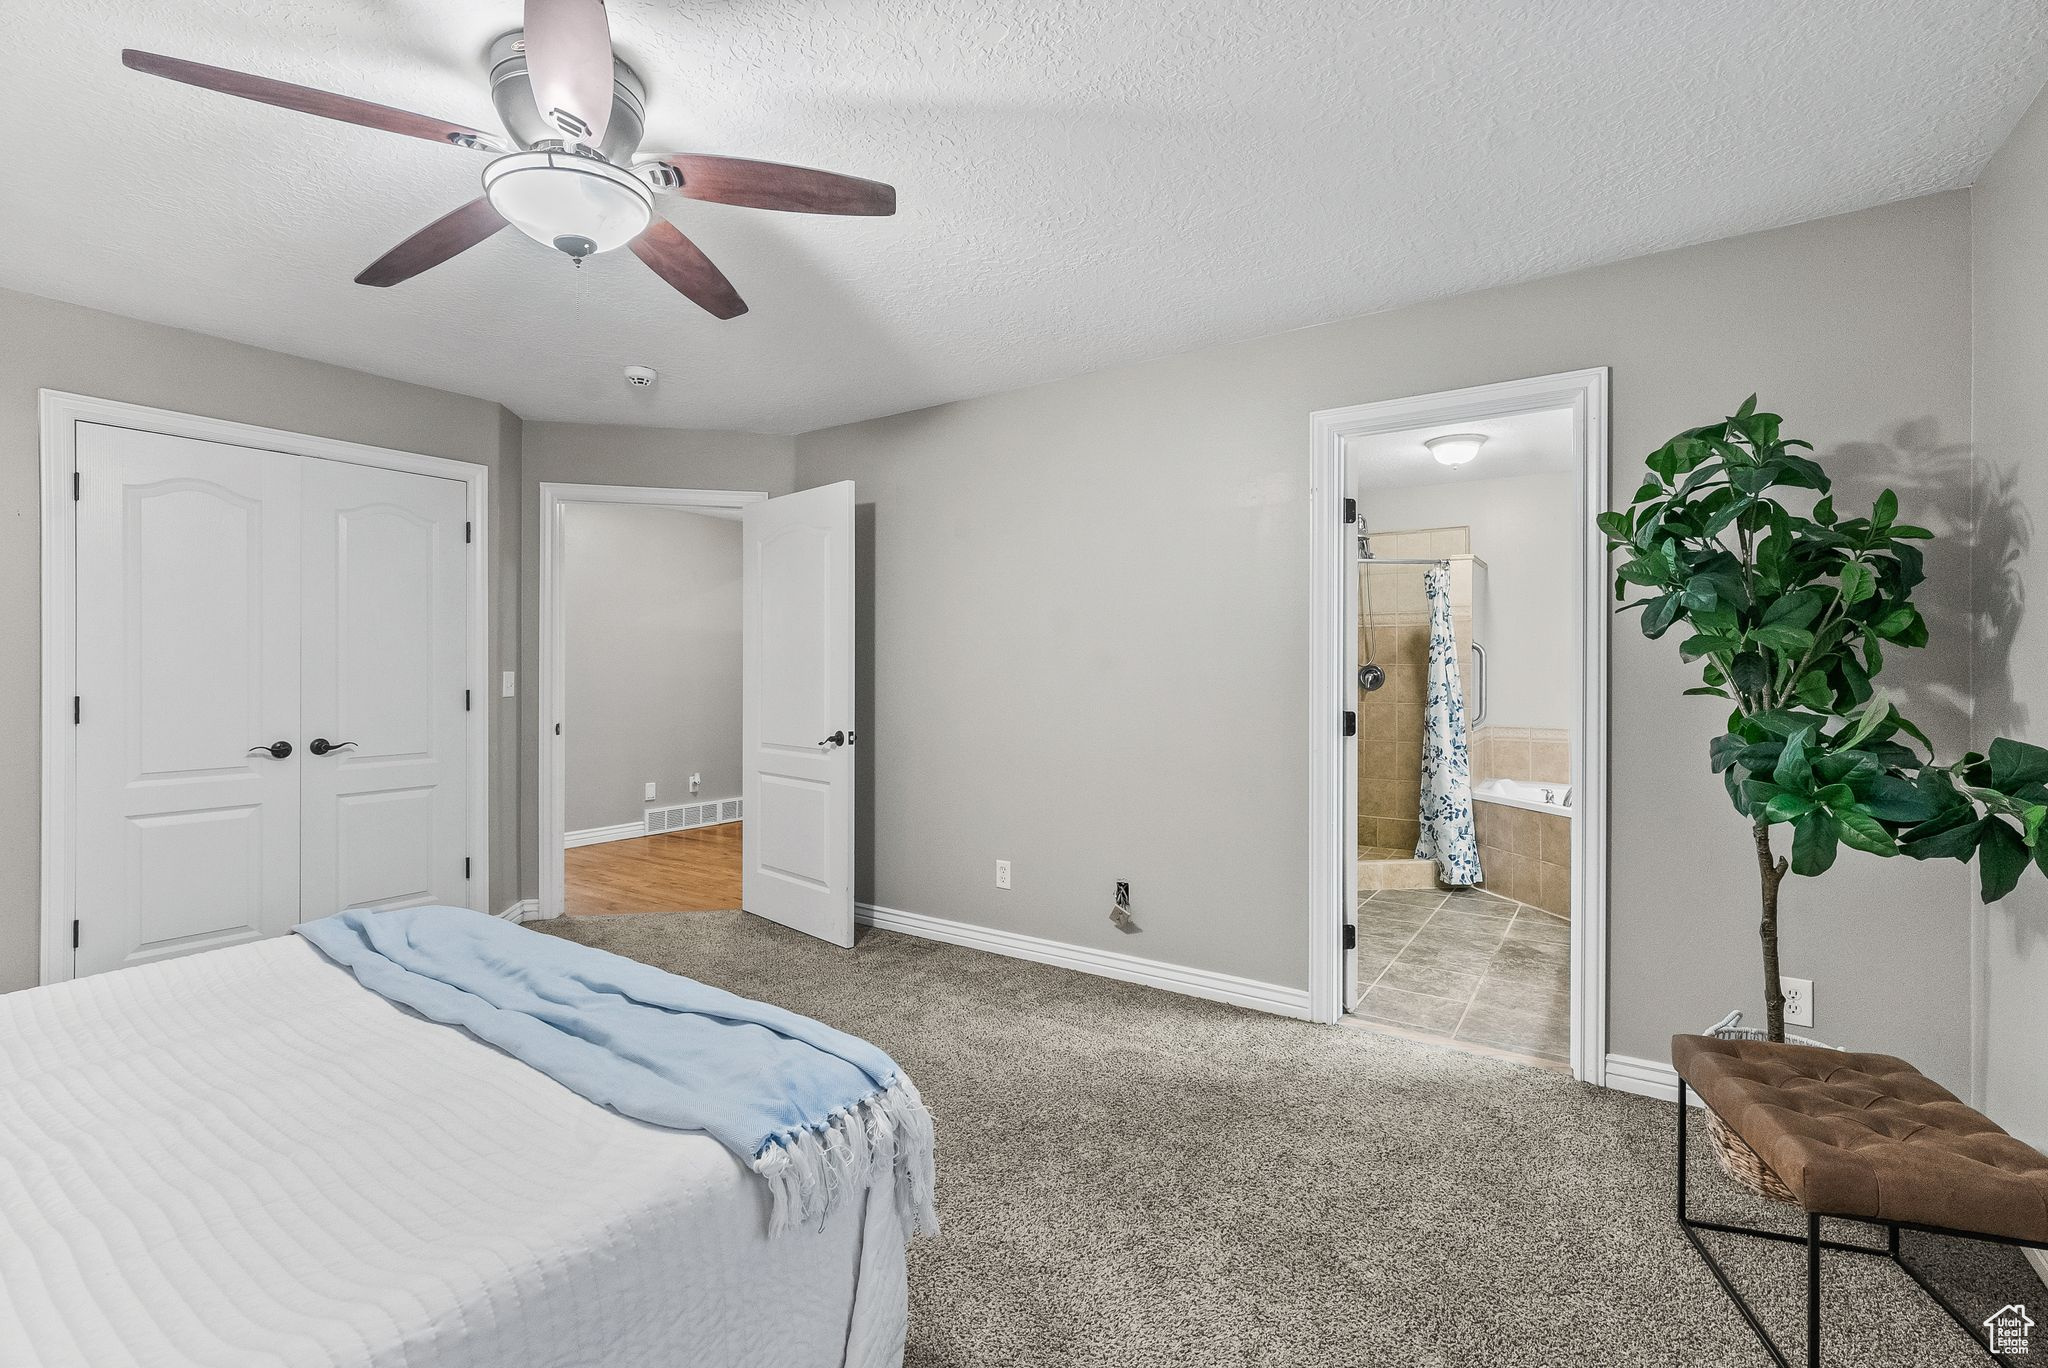 Carpeted bedroom featuring a closet, ceiling fan, ensuite bathroom, and a textured ceiling